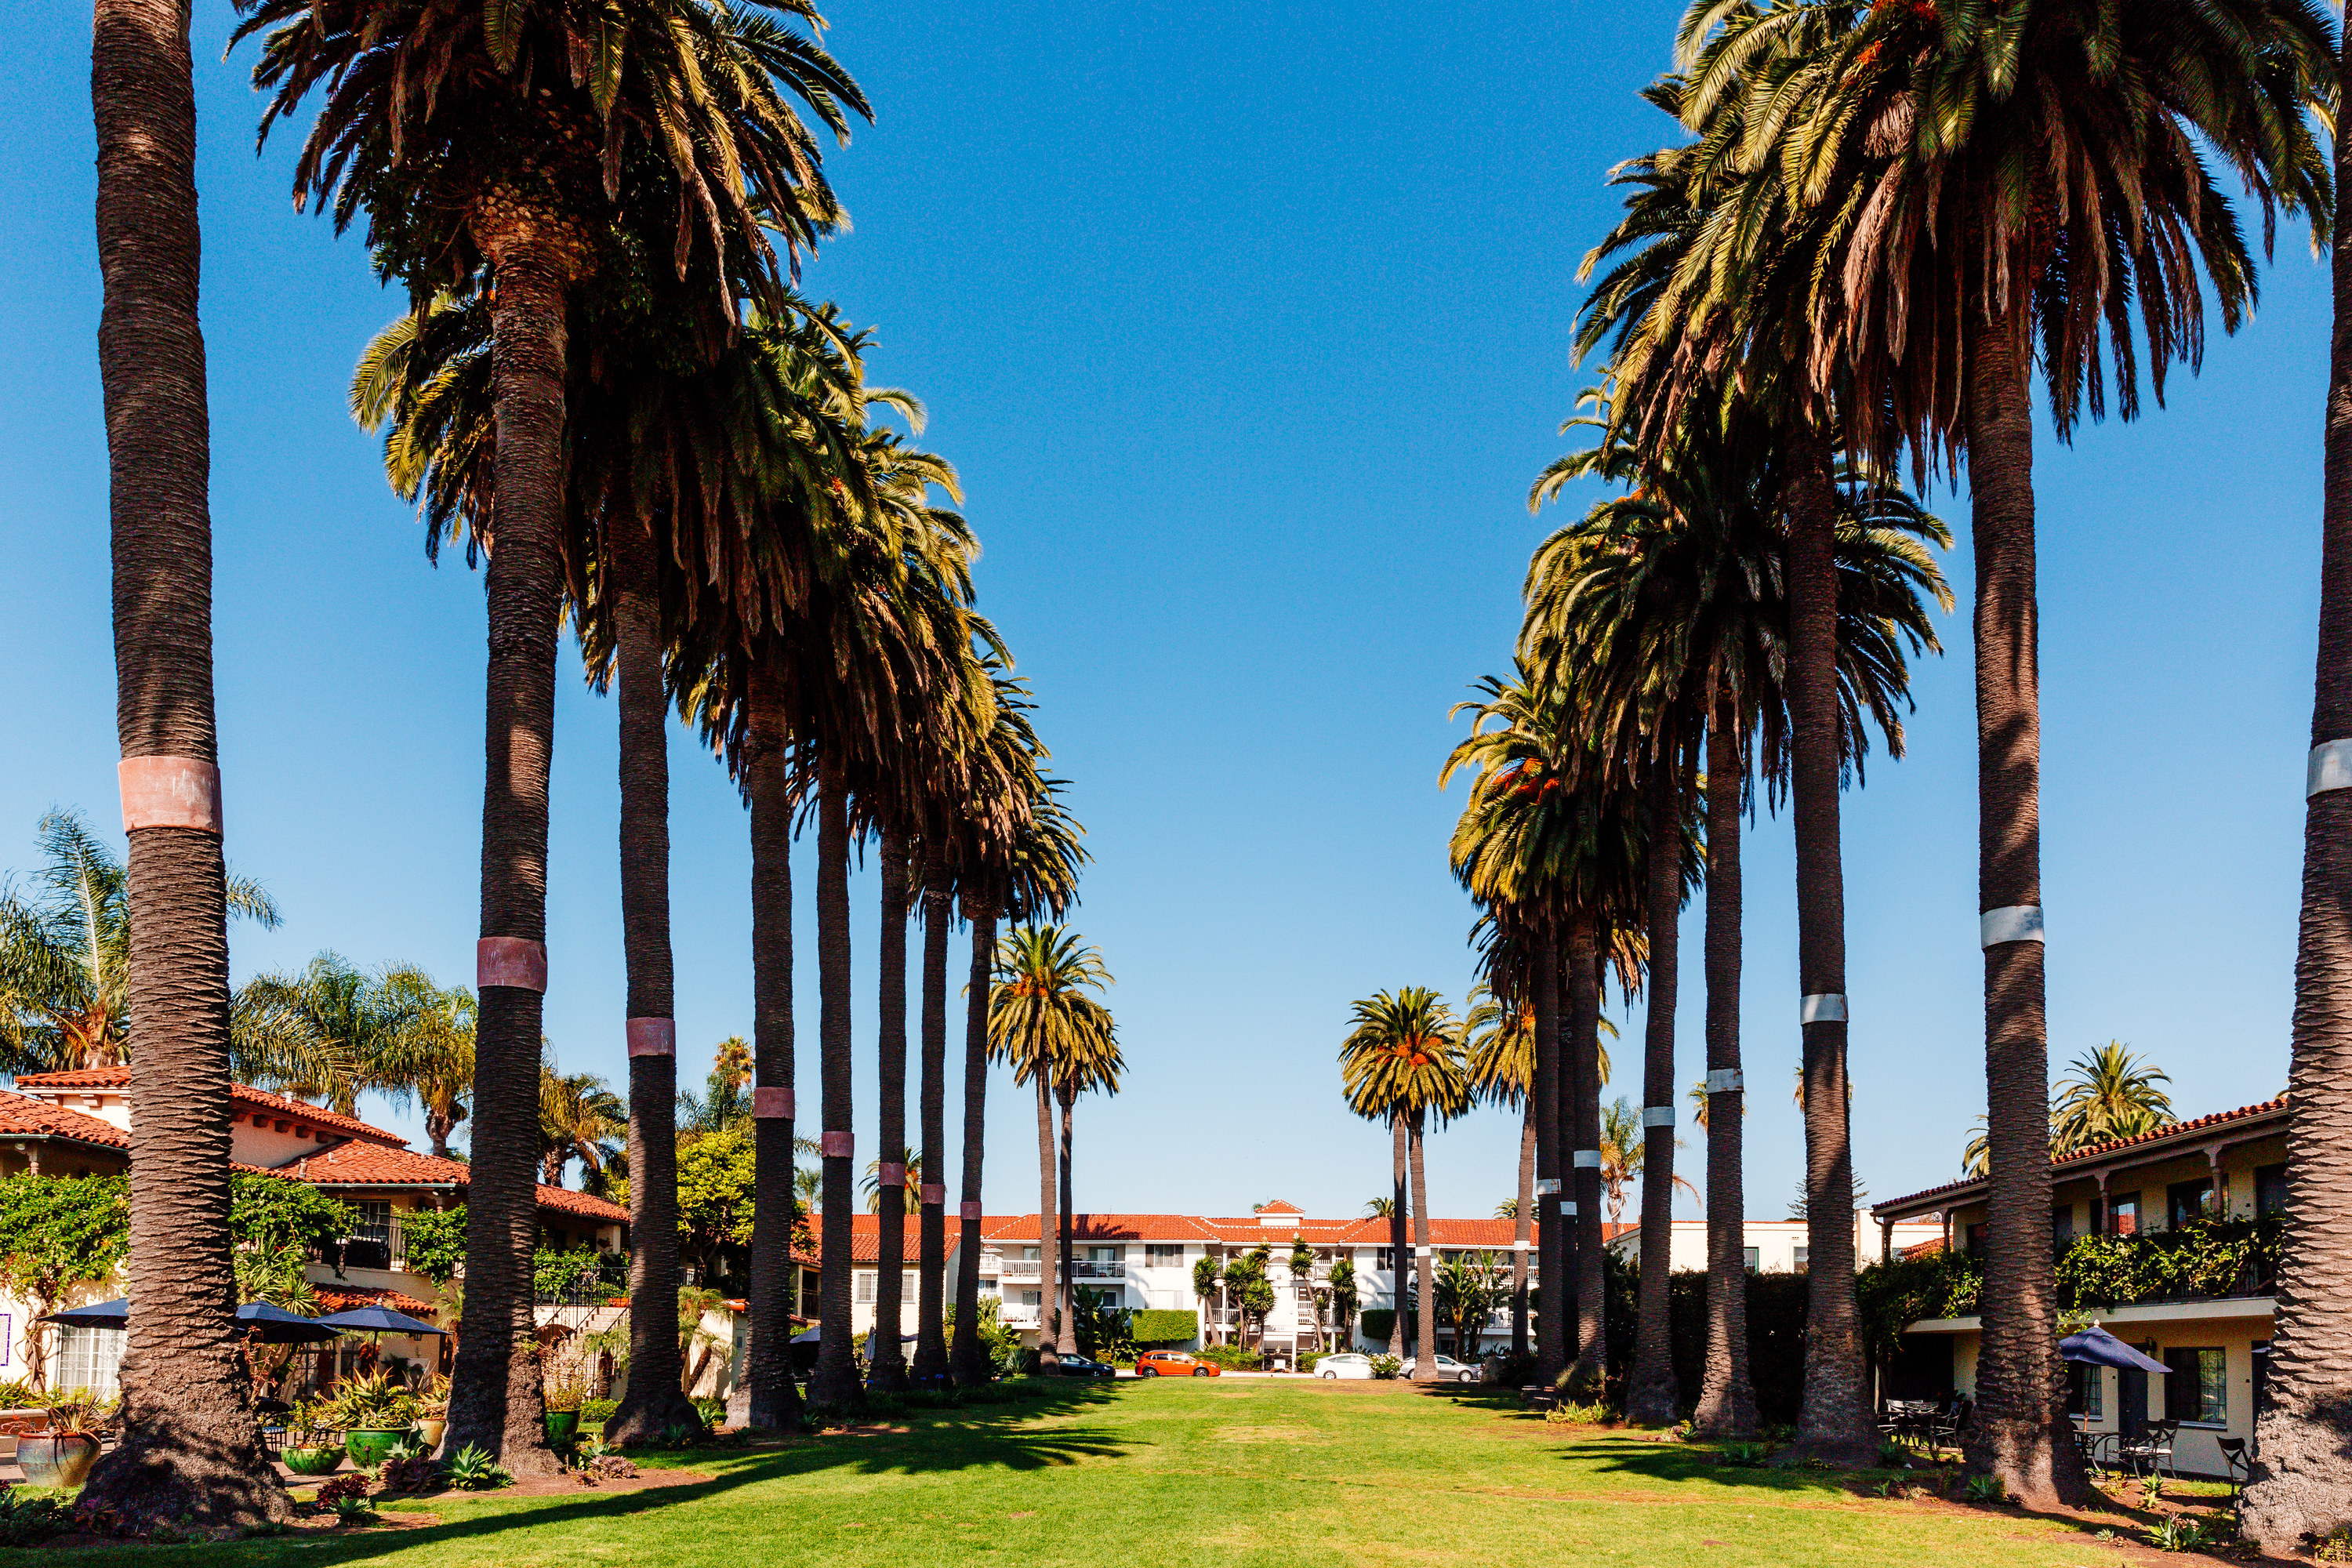 Palm trees and a green lawn in front of terra-cotta roofed buildings in Santa Barbara.